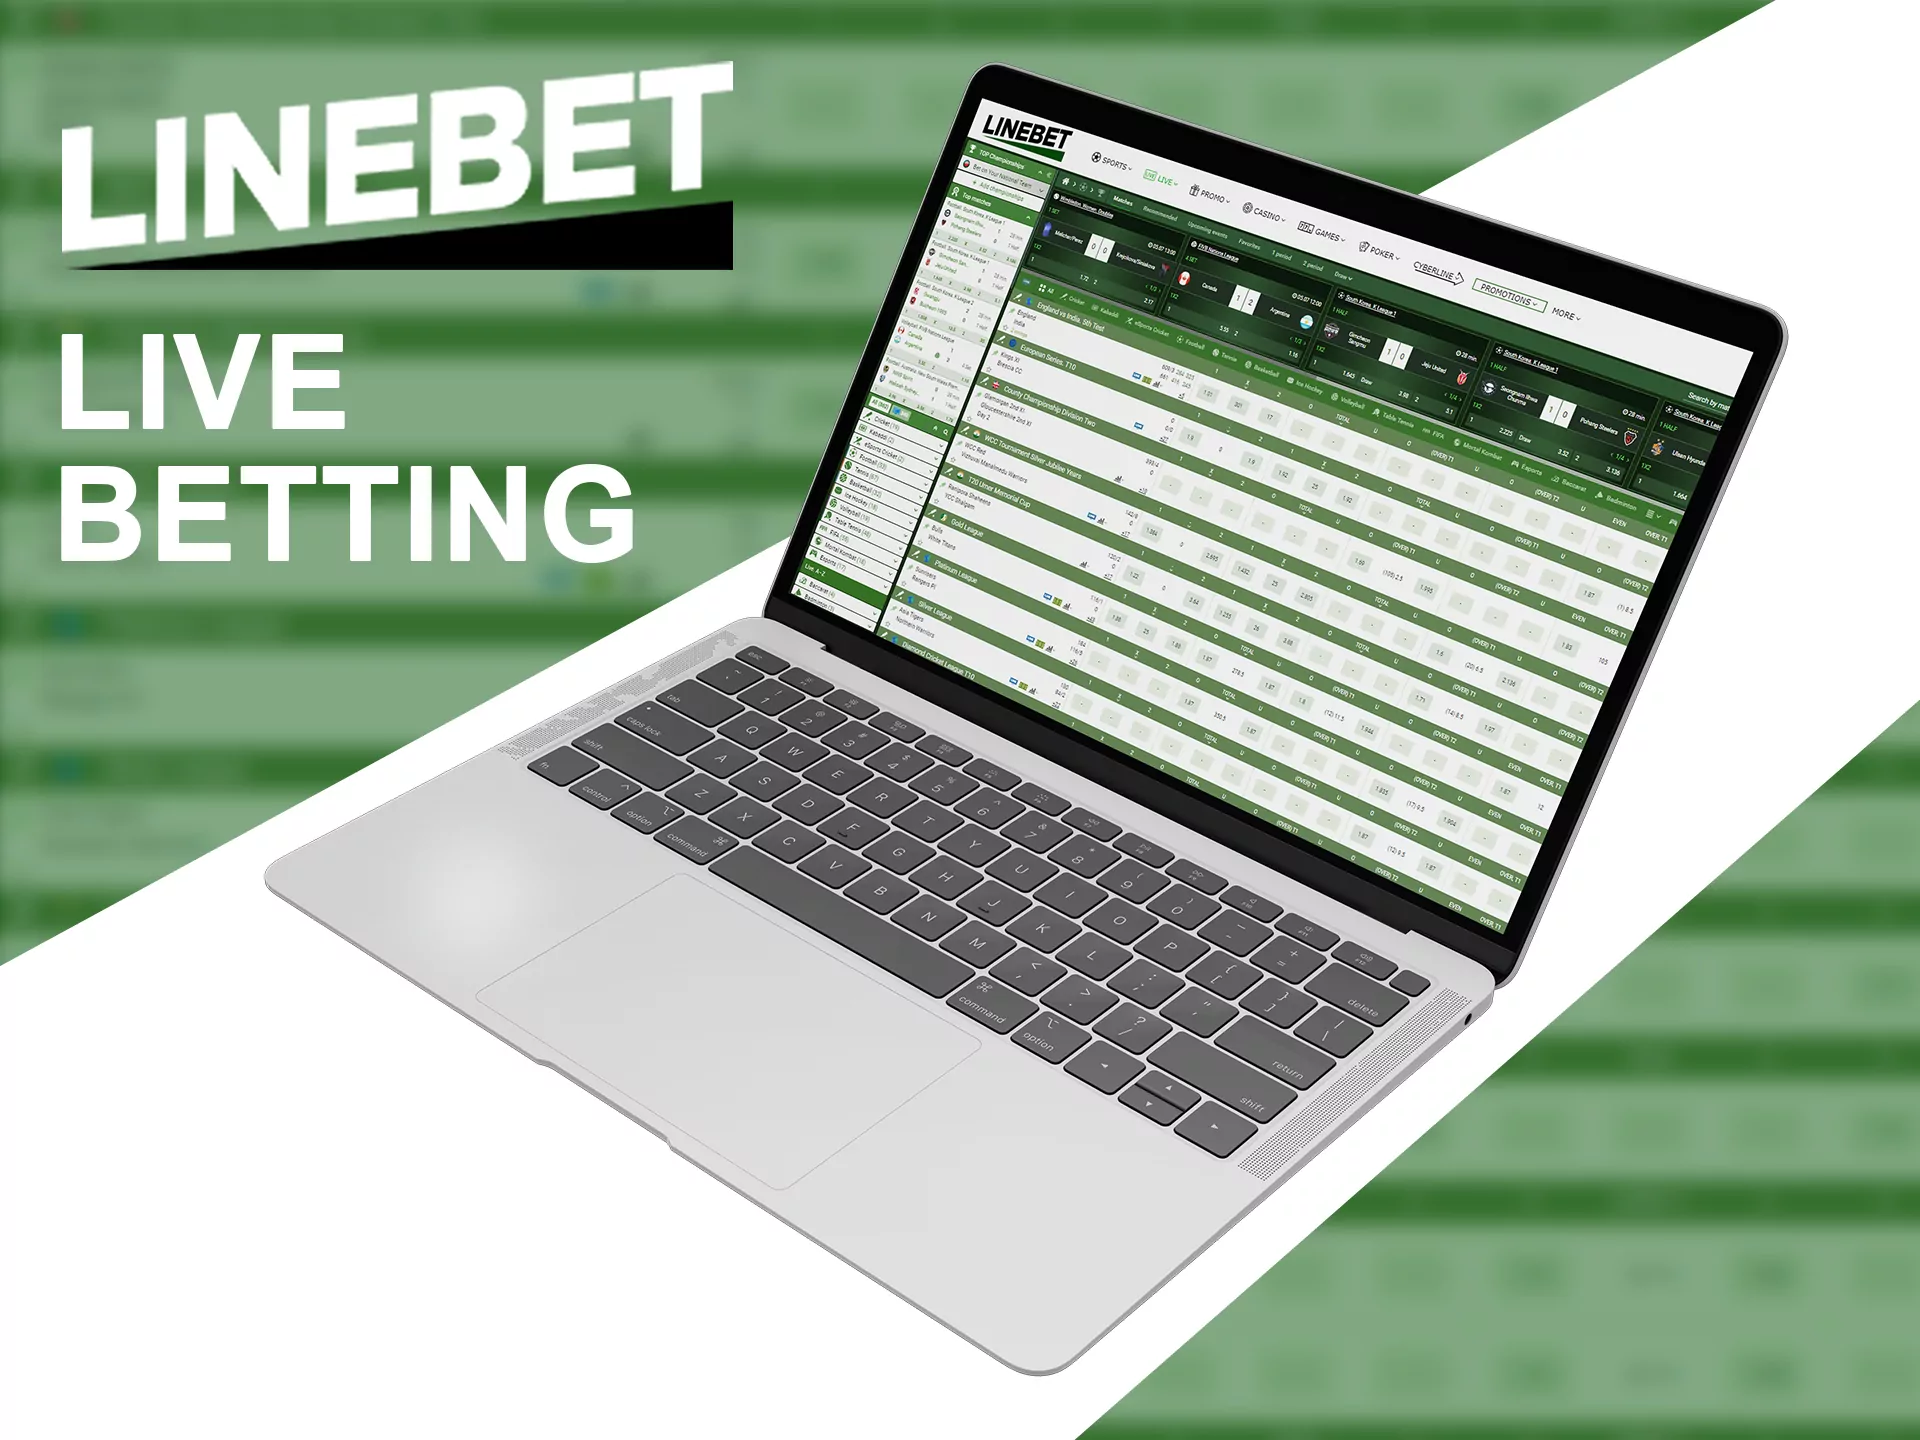 Live betting is available as a feature at Linebet betting site.